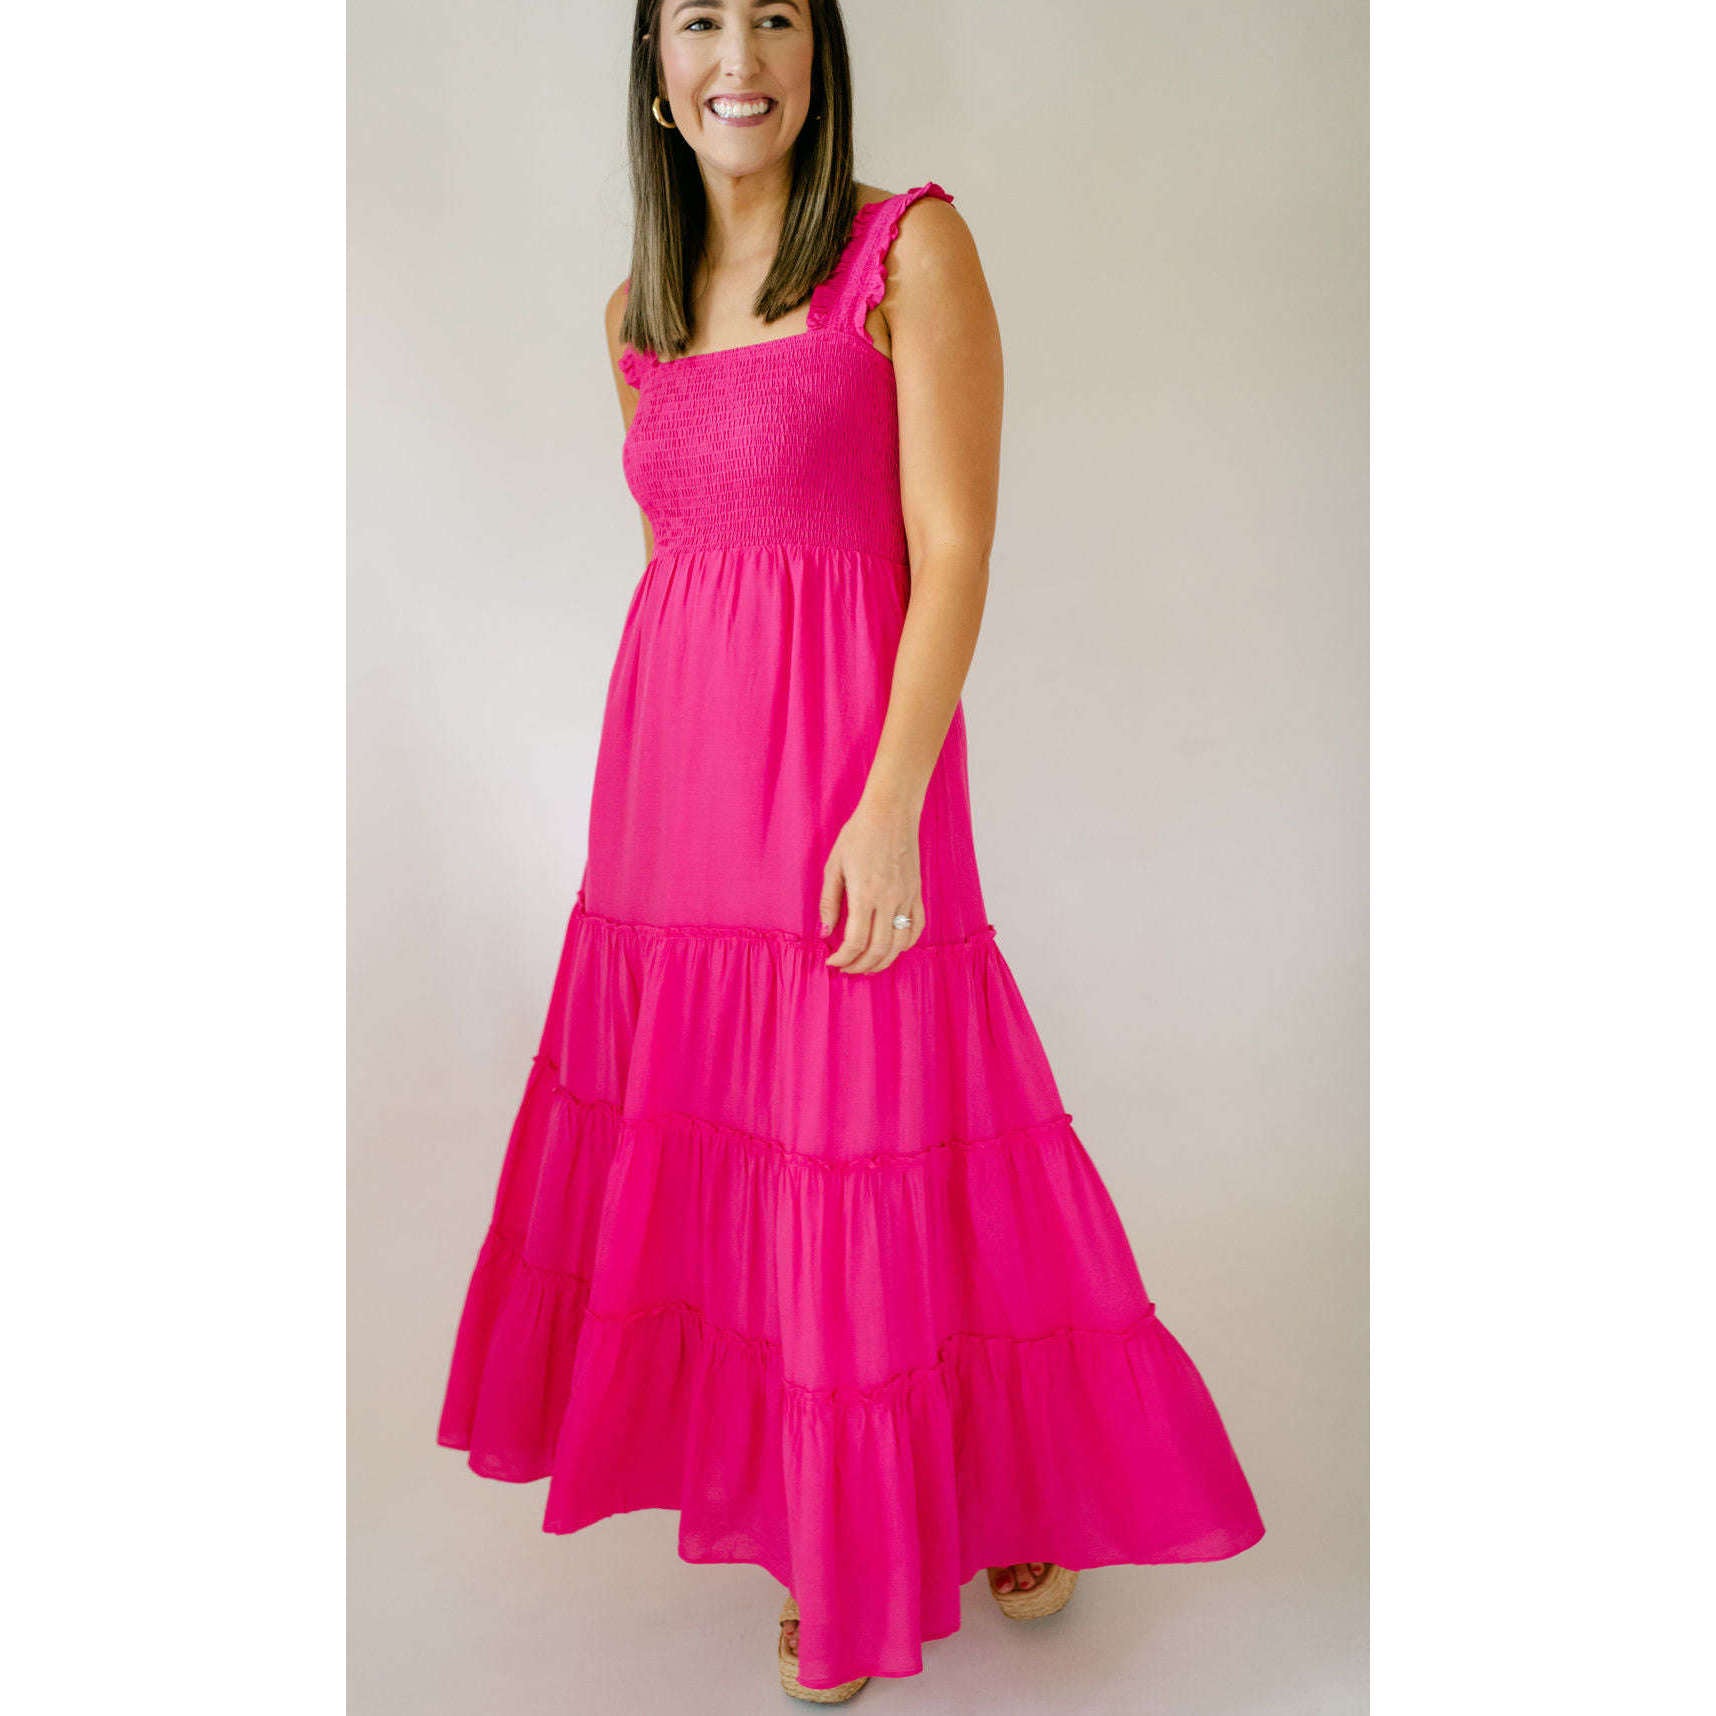 8.28 Boutique:LUCY PARIS,Lucy Paris Dylan Smocked Dress in Fuchsia,Dress